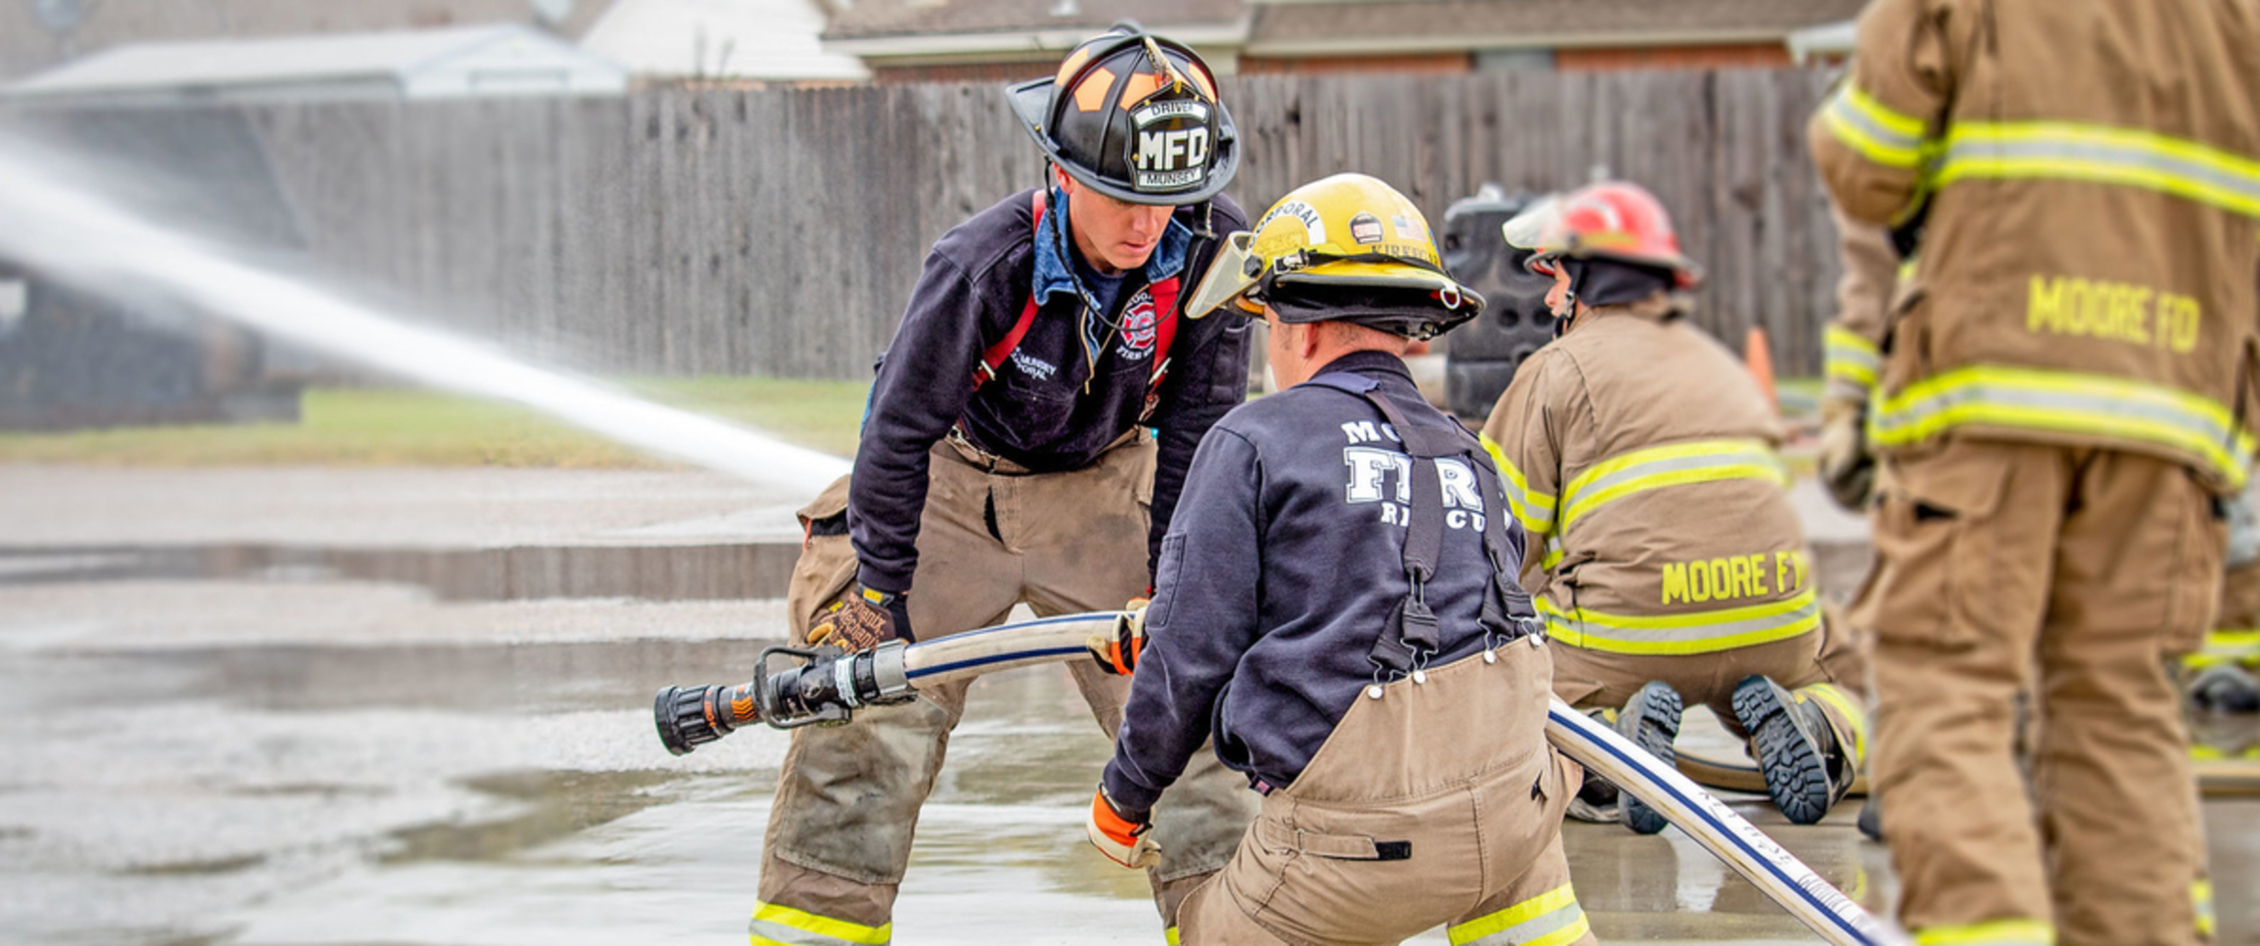 Firefighters training with fire hose.